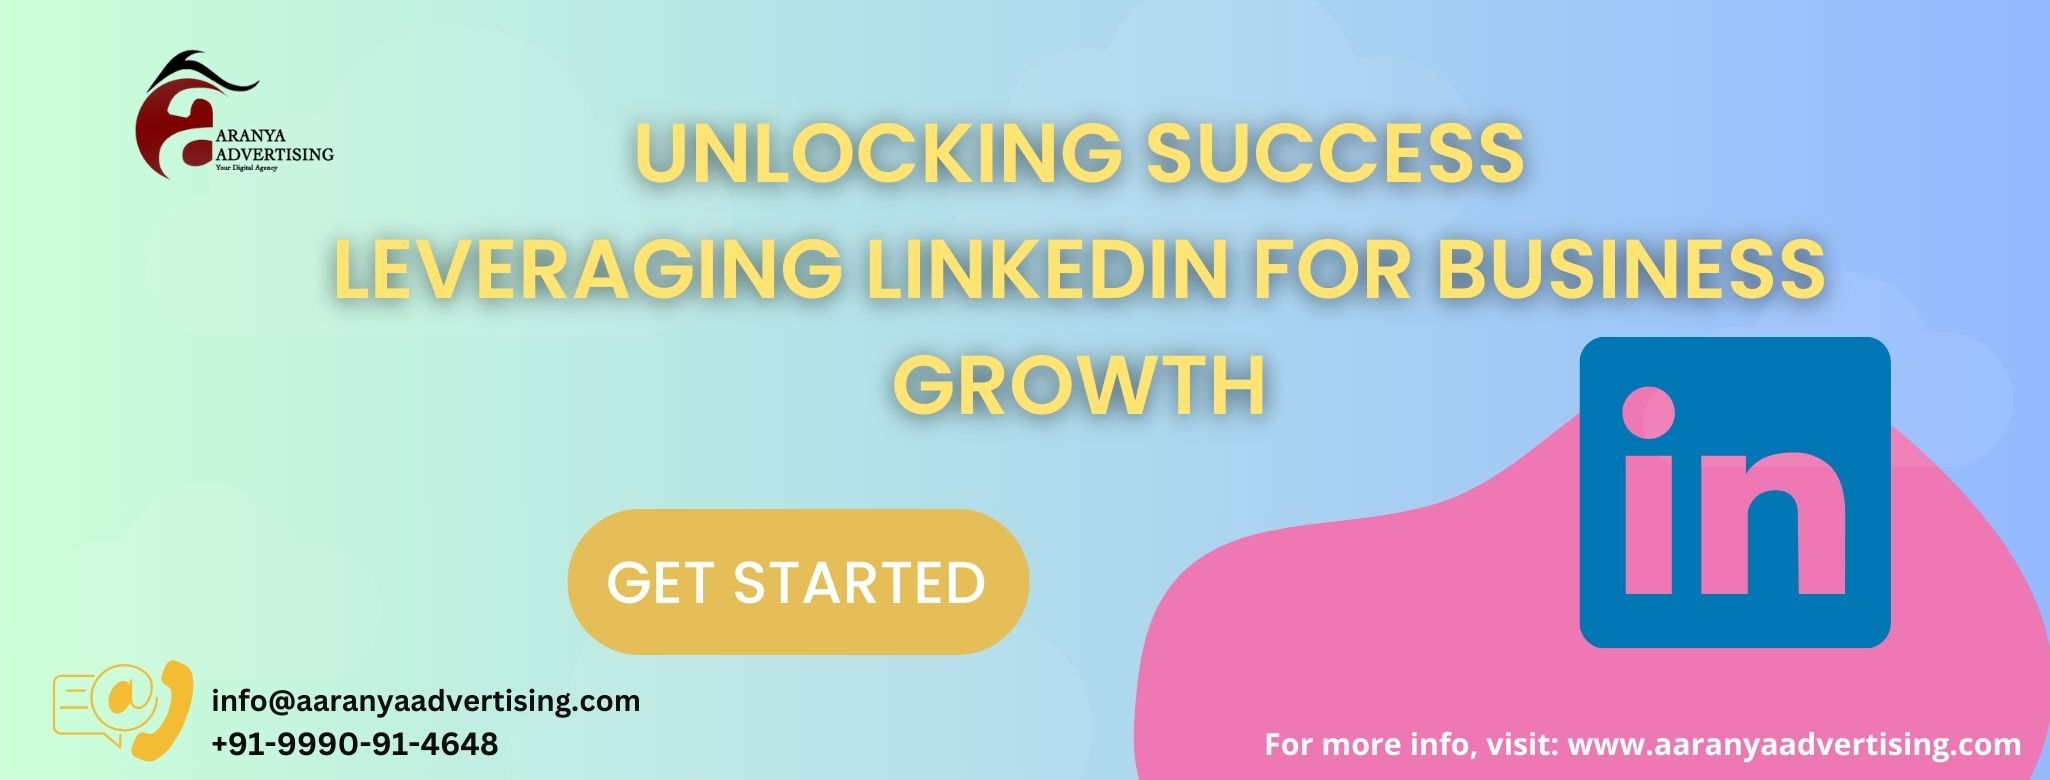 Explore the power of LinkedIn for business growth. Optimize your profile, craft engaging content, and build connections.